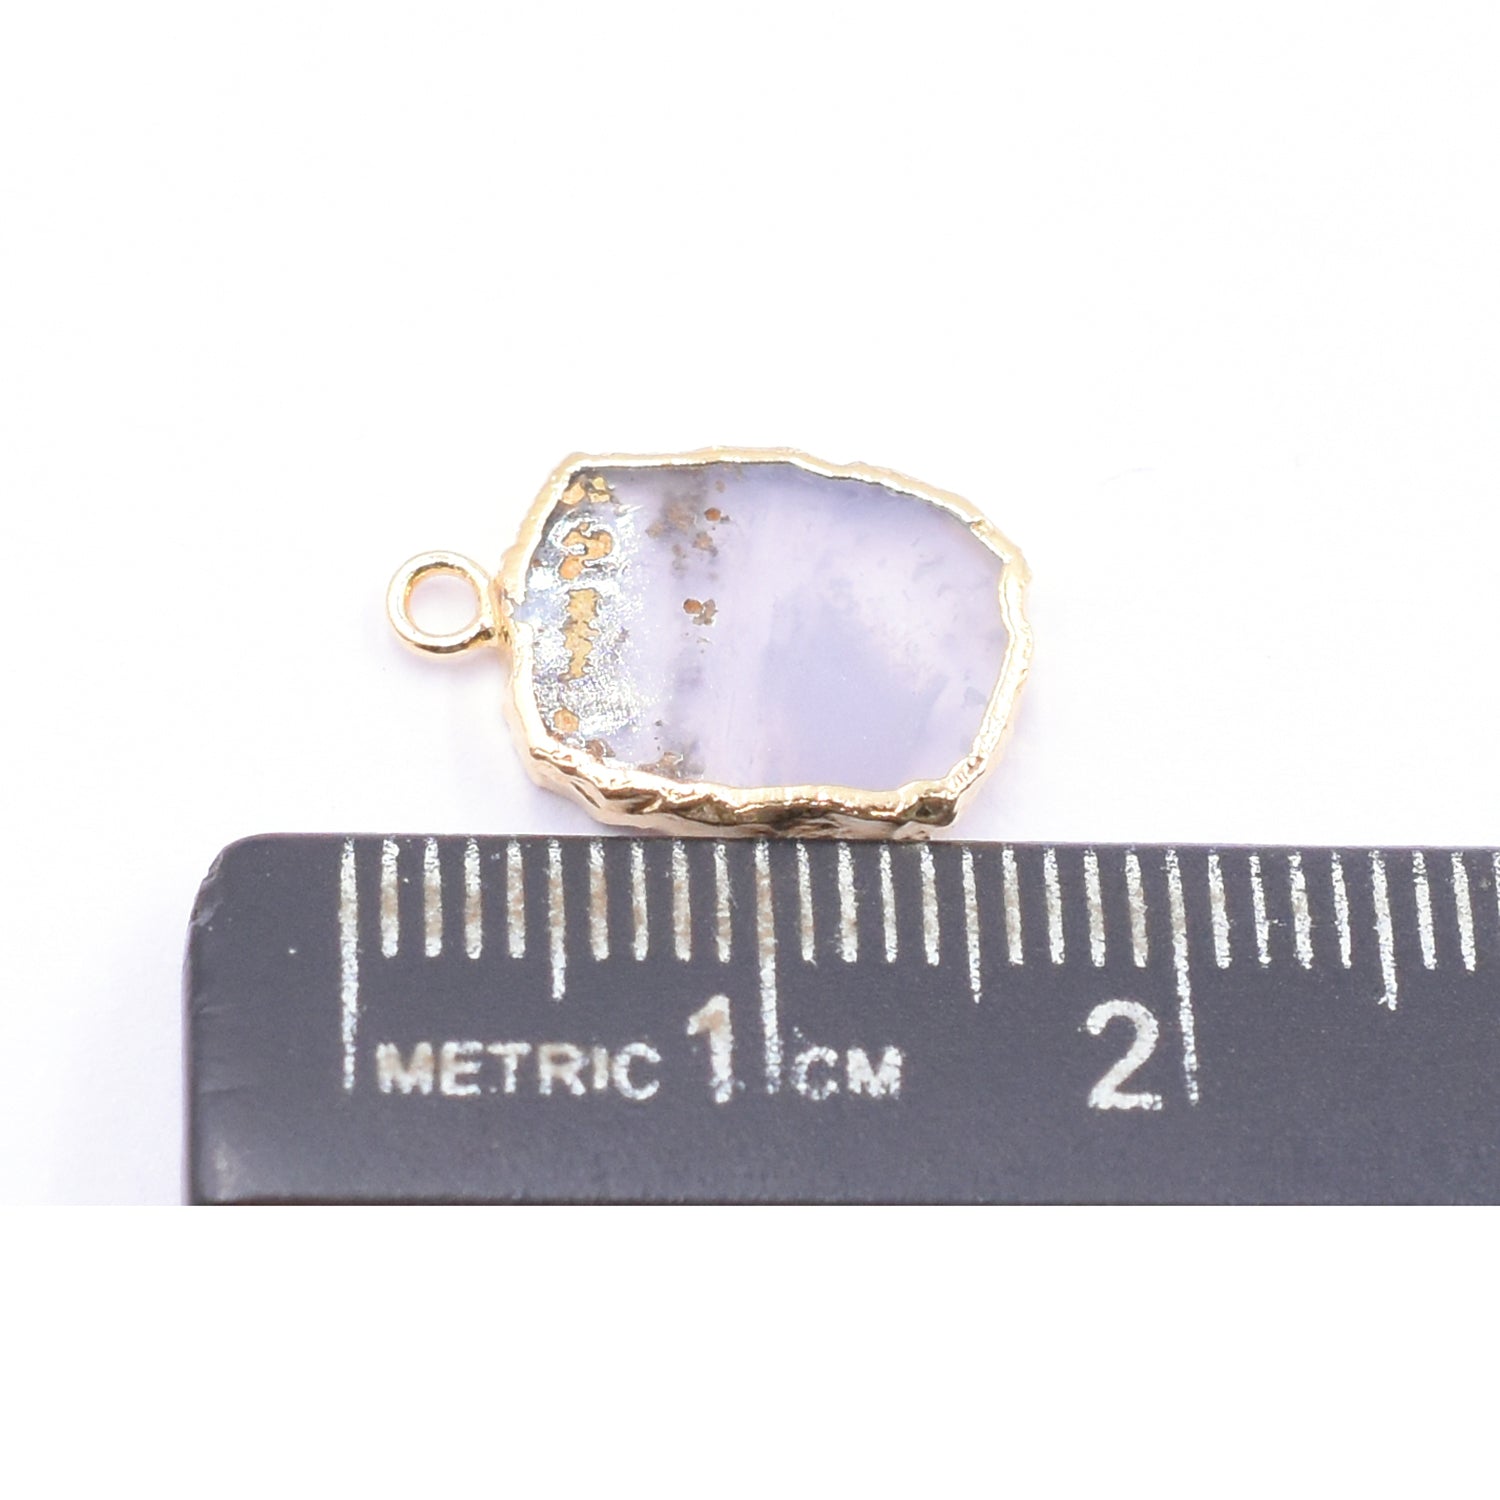 Blue Lace Agate 14X10 MM Rectangle Shape Gold Electroplated Pendant